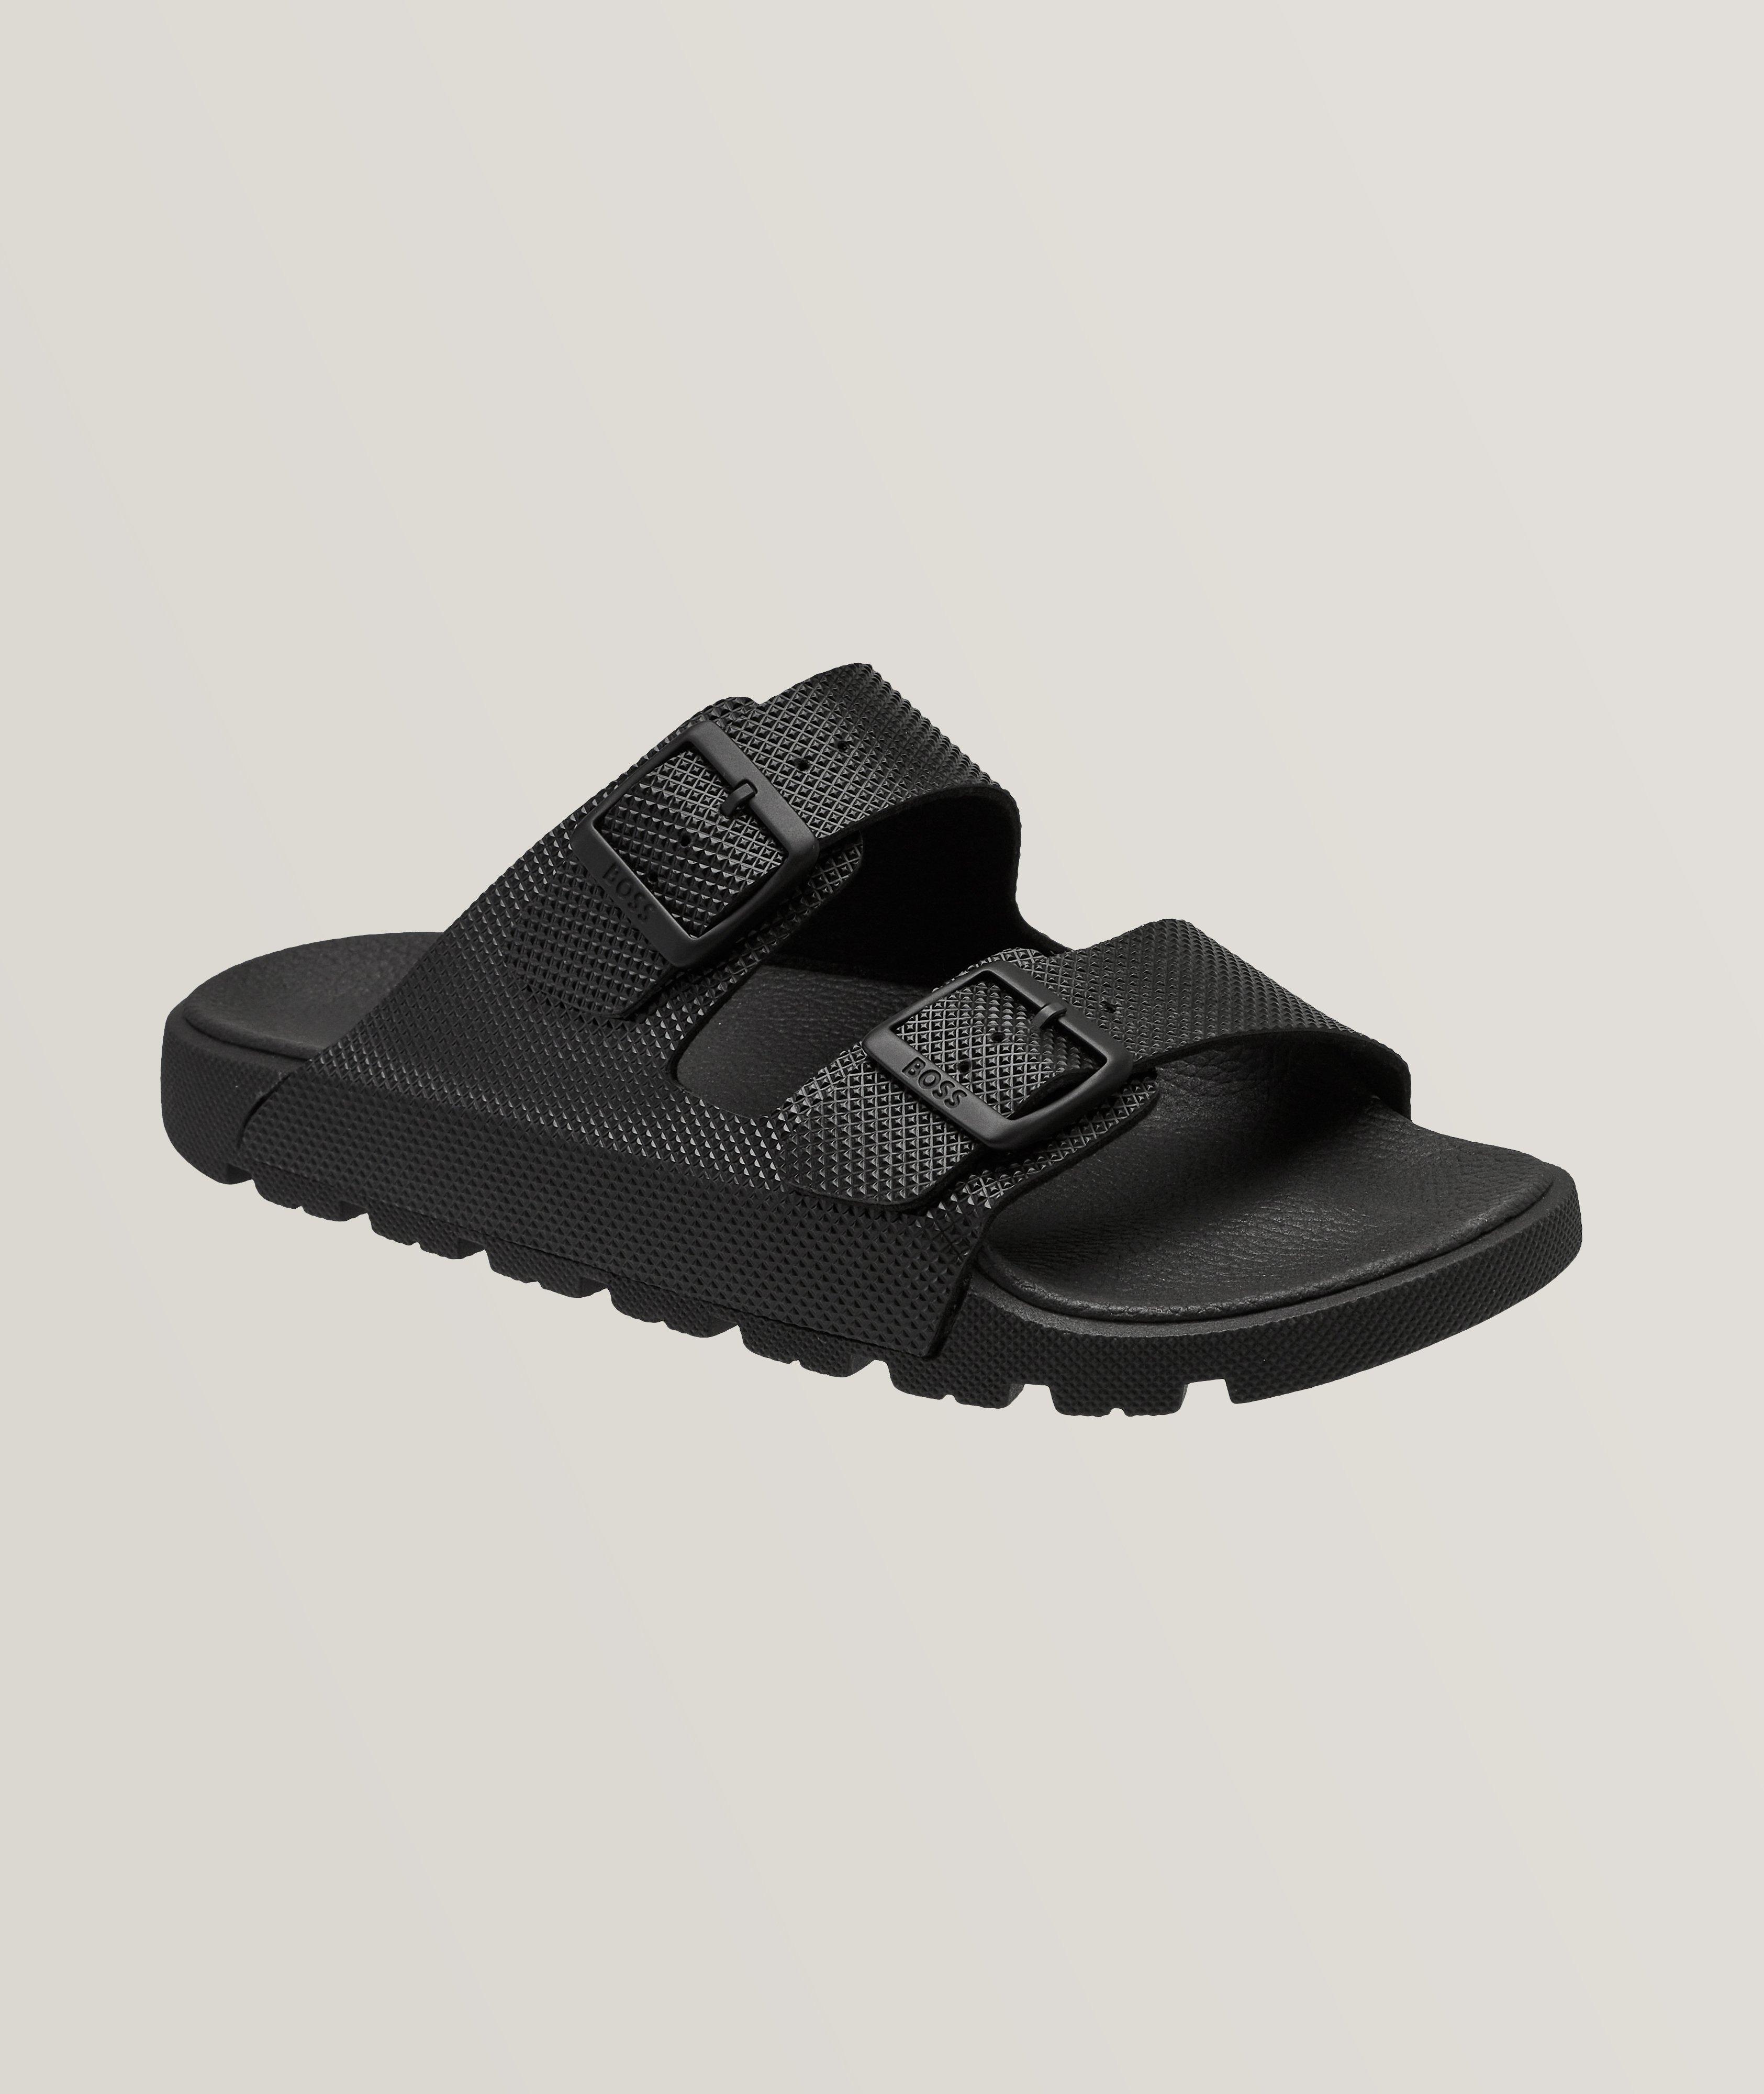 All Rubber Superfly Sandals  image 0